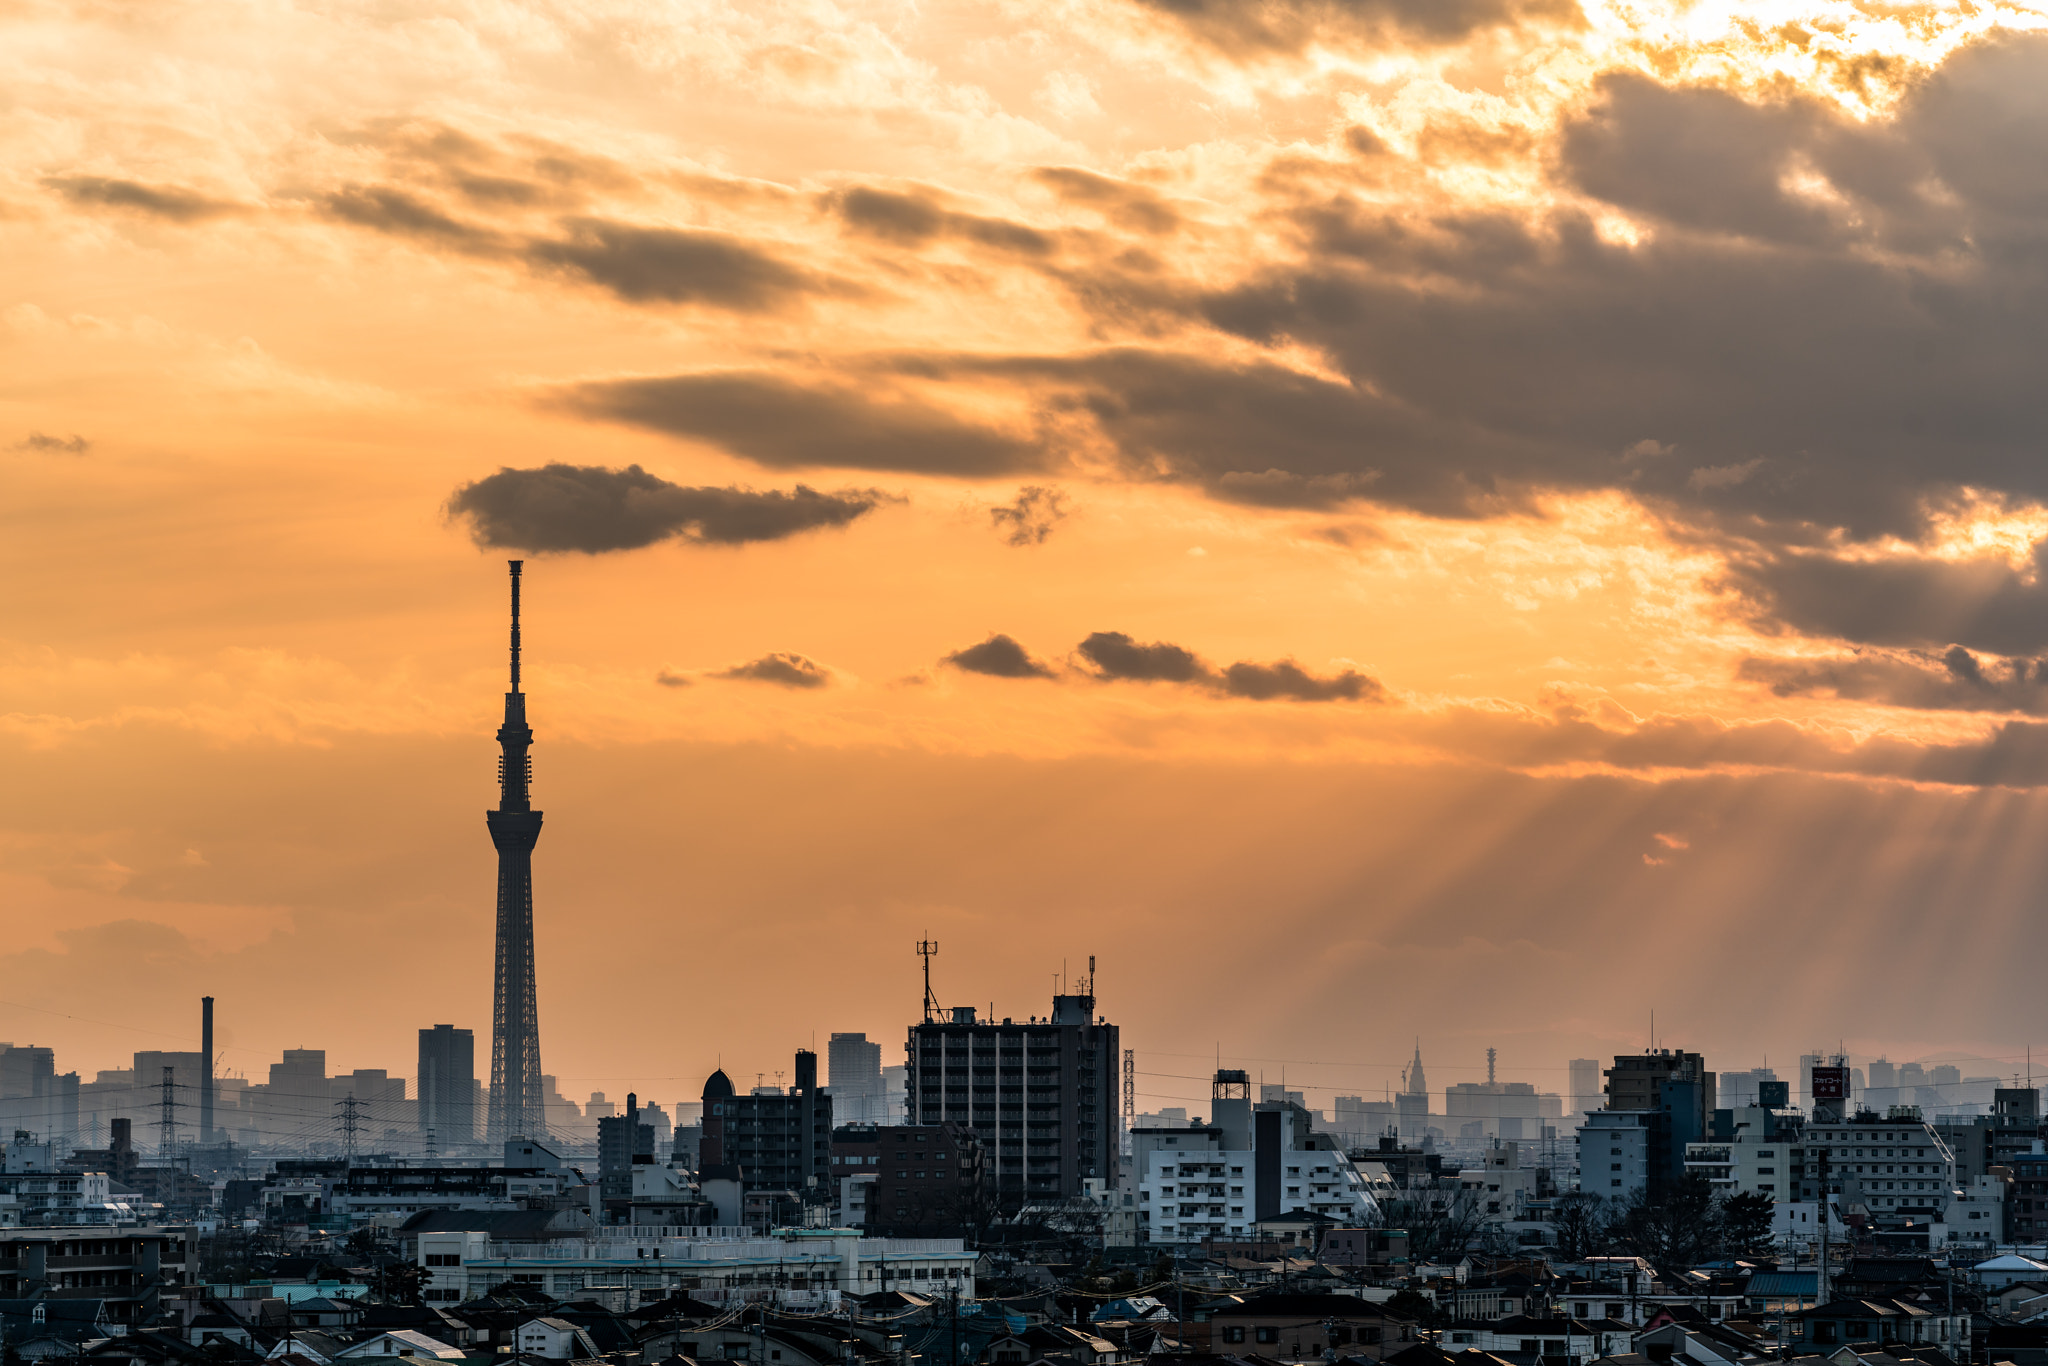 Sony a7R II sample photo. Tokyo skytree and a shaft of light photography